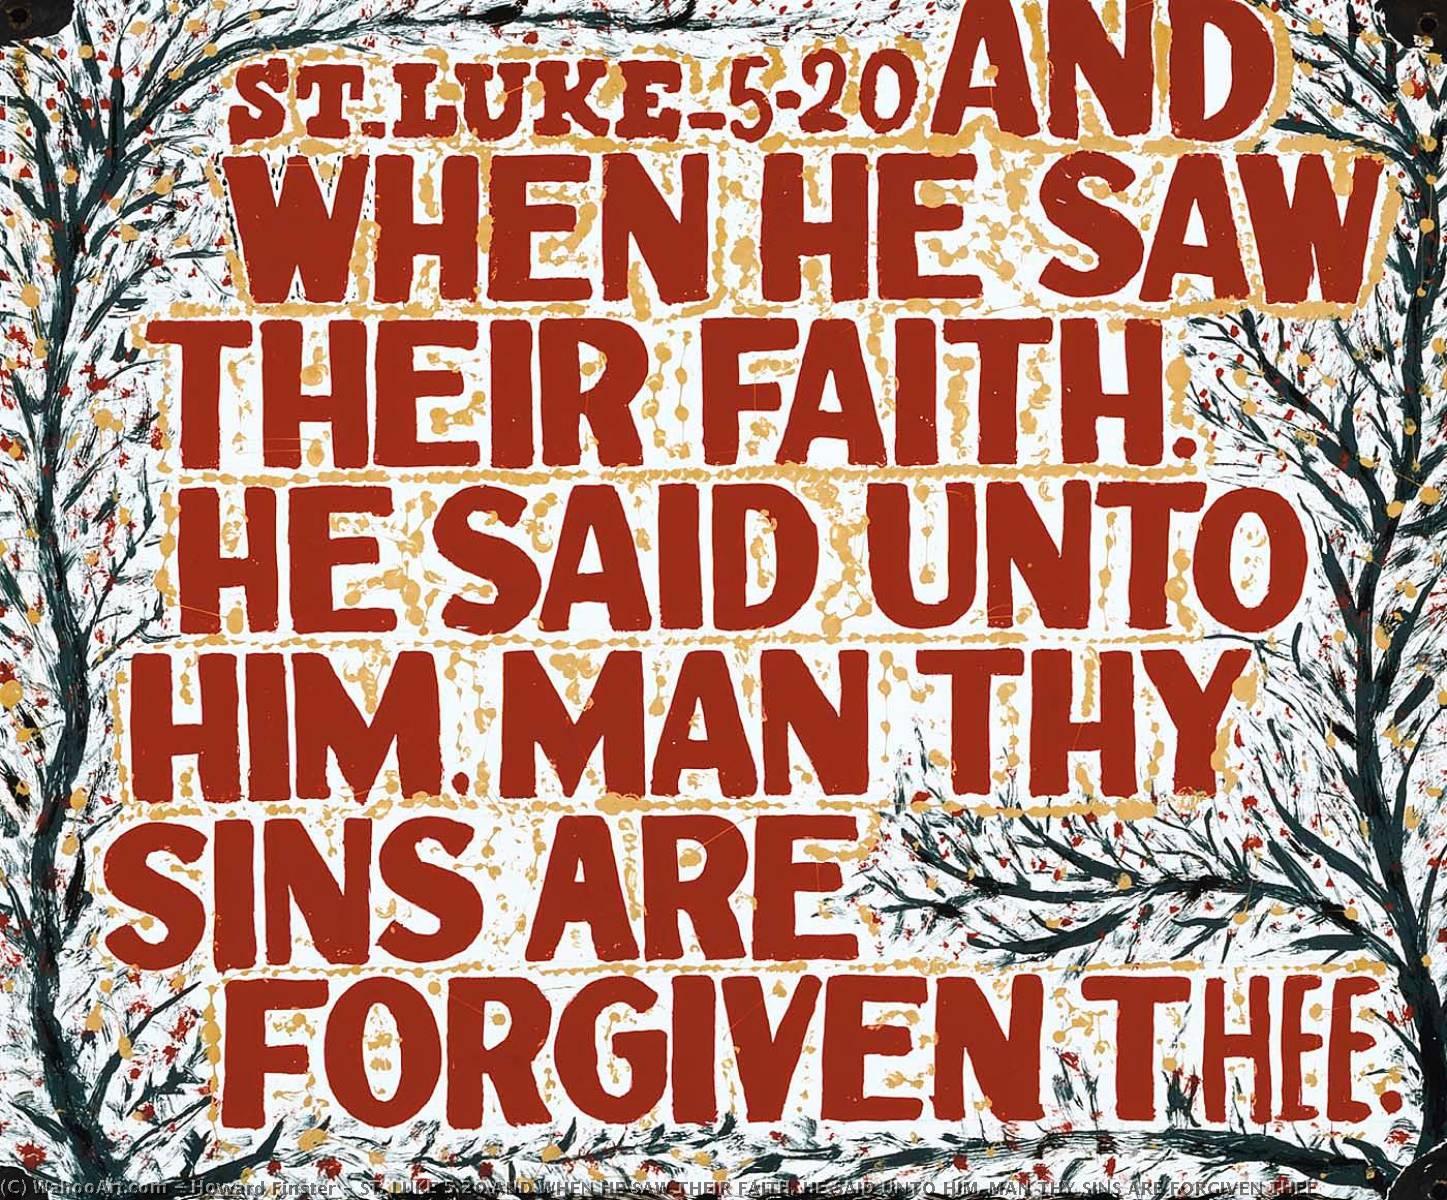 WikiOO.org - Encyclopedia of Fine Arts - Schilderen, Artwork Howard Finster - ST. LUKE 5 20 AND WHEN HE SAW THEIR FAITH. HE SAID UNTO HIM. MAN THY SINS ARE FORGIVEN THEE